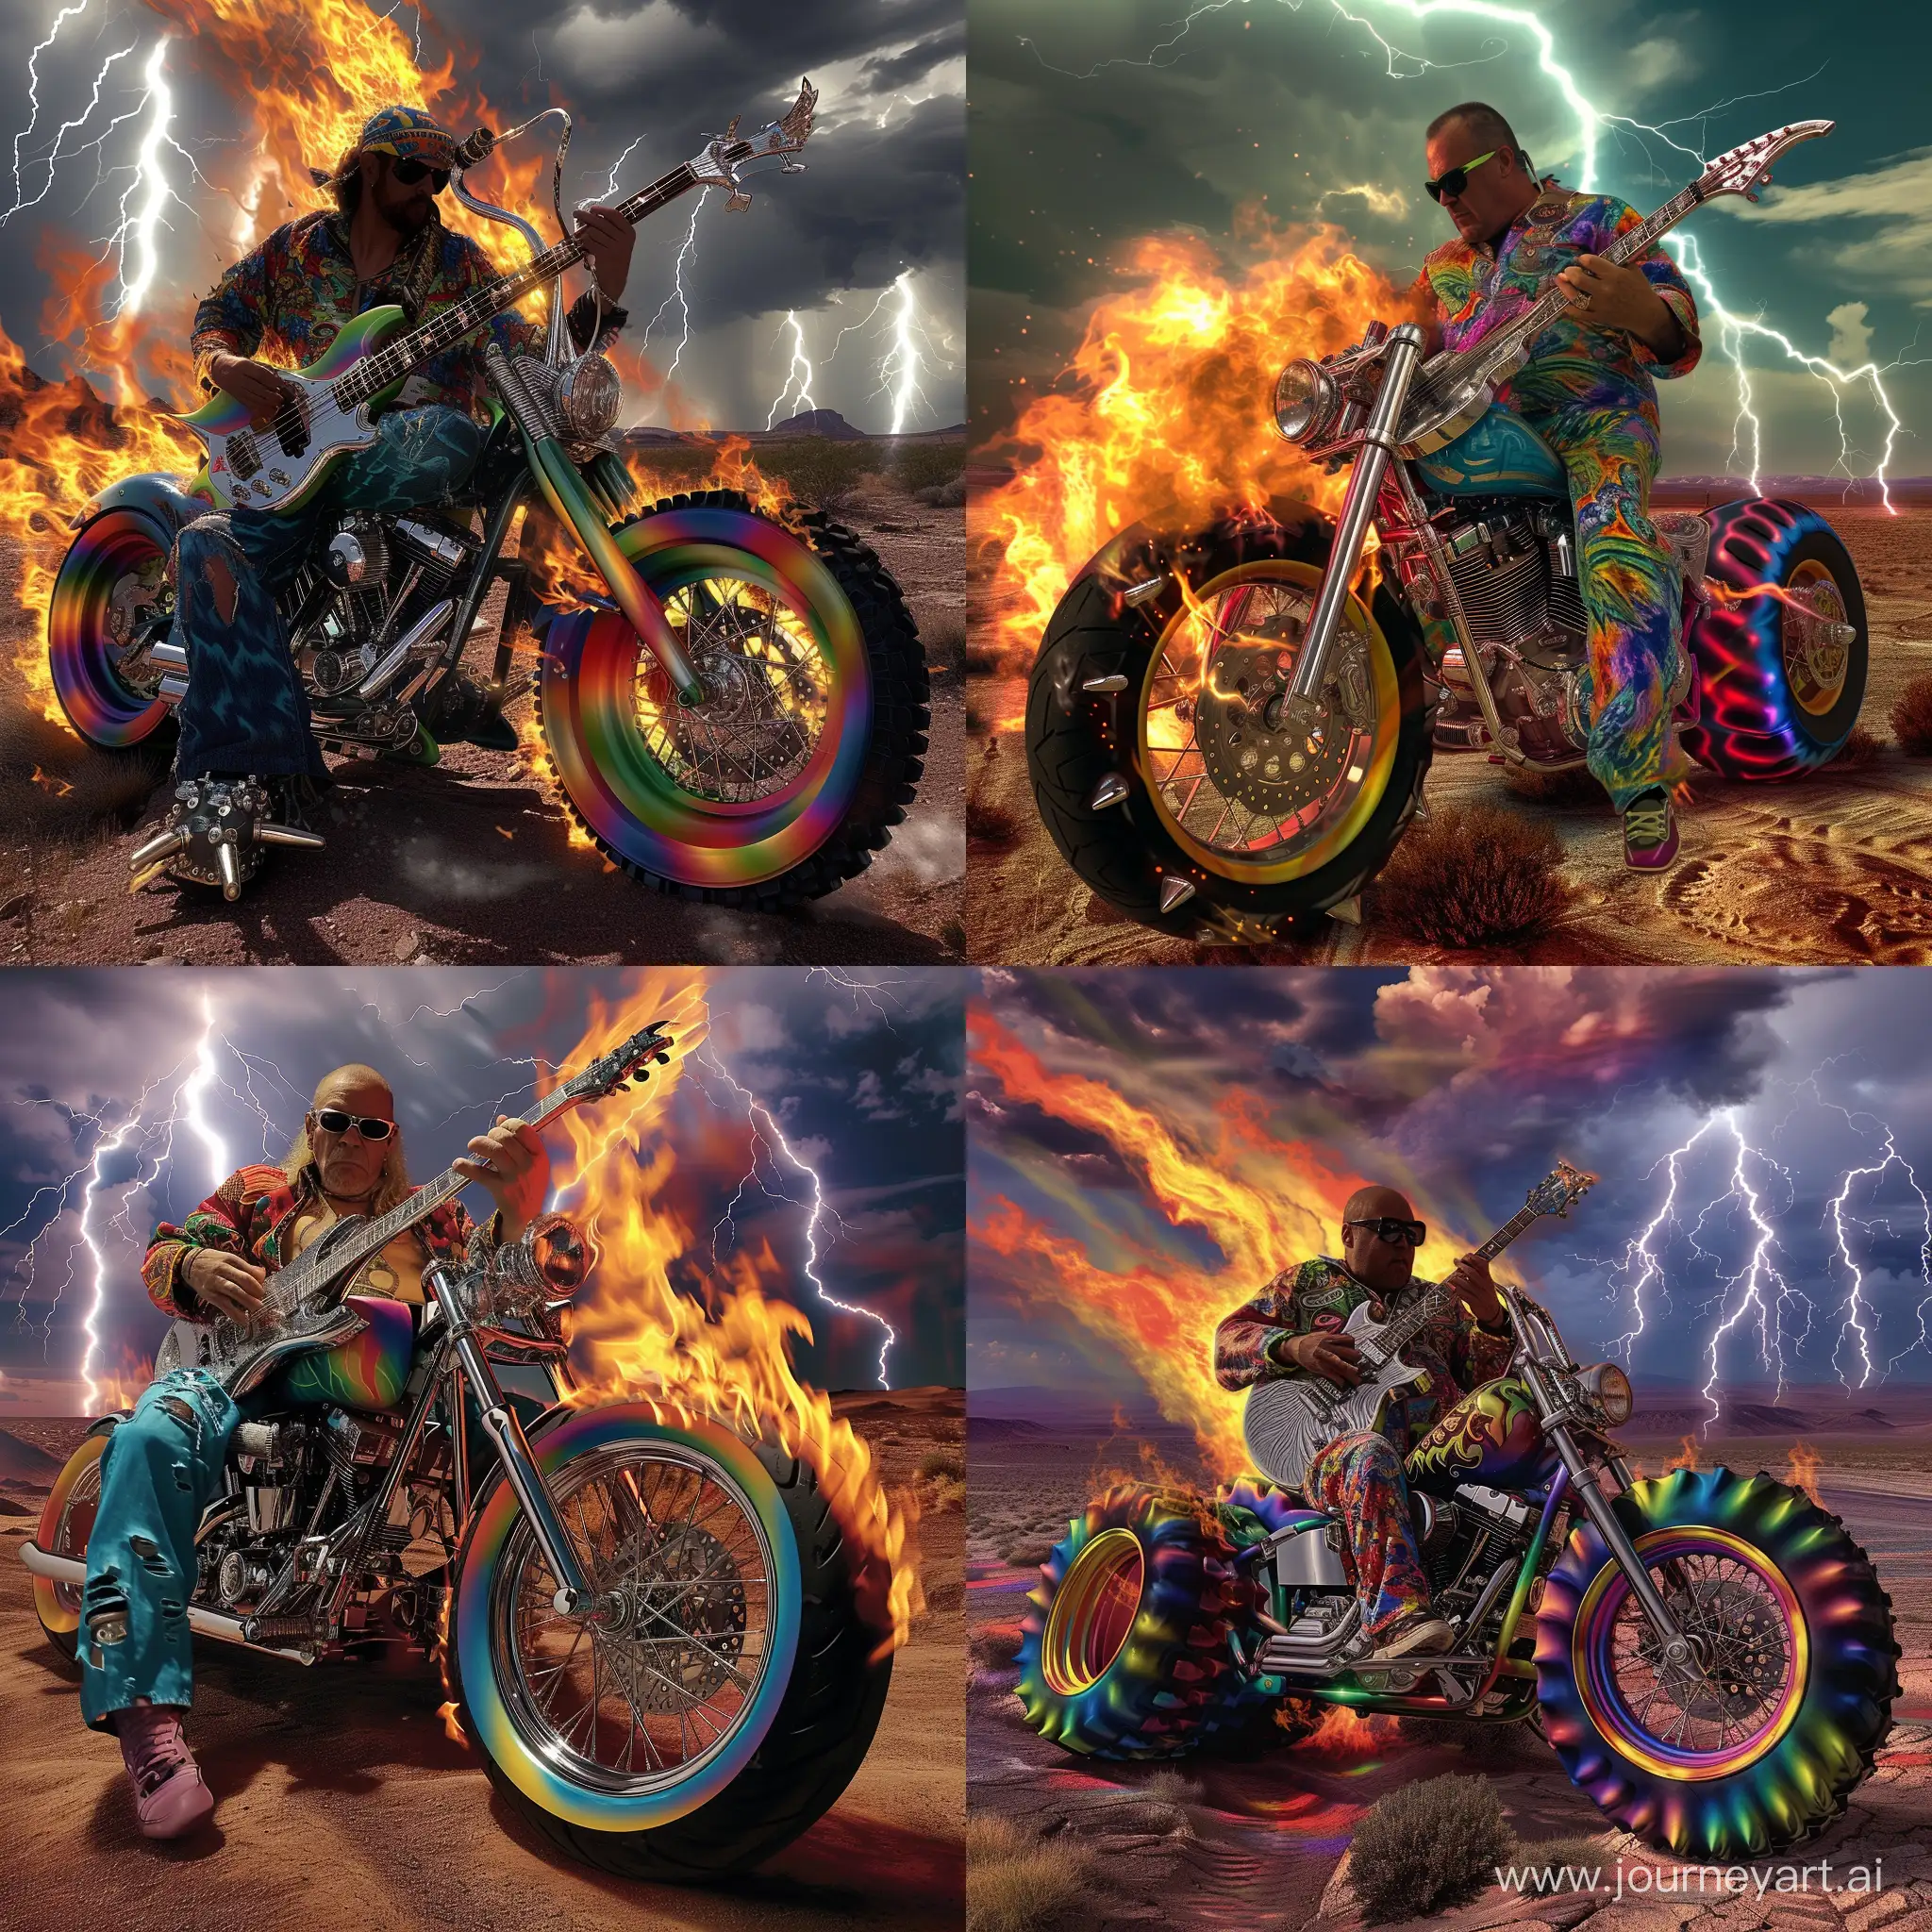 A rock and roll guitarist is playing a chrome guitar. He is sitting on a fire engulfed, colorful, custom motorcycle, with oversized tires and chrome spoke rims. A brilliant desert sky with  multiple lightning bursts, is covering the landscape. The camera is in fronti